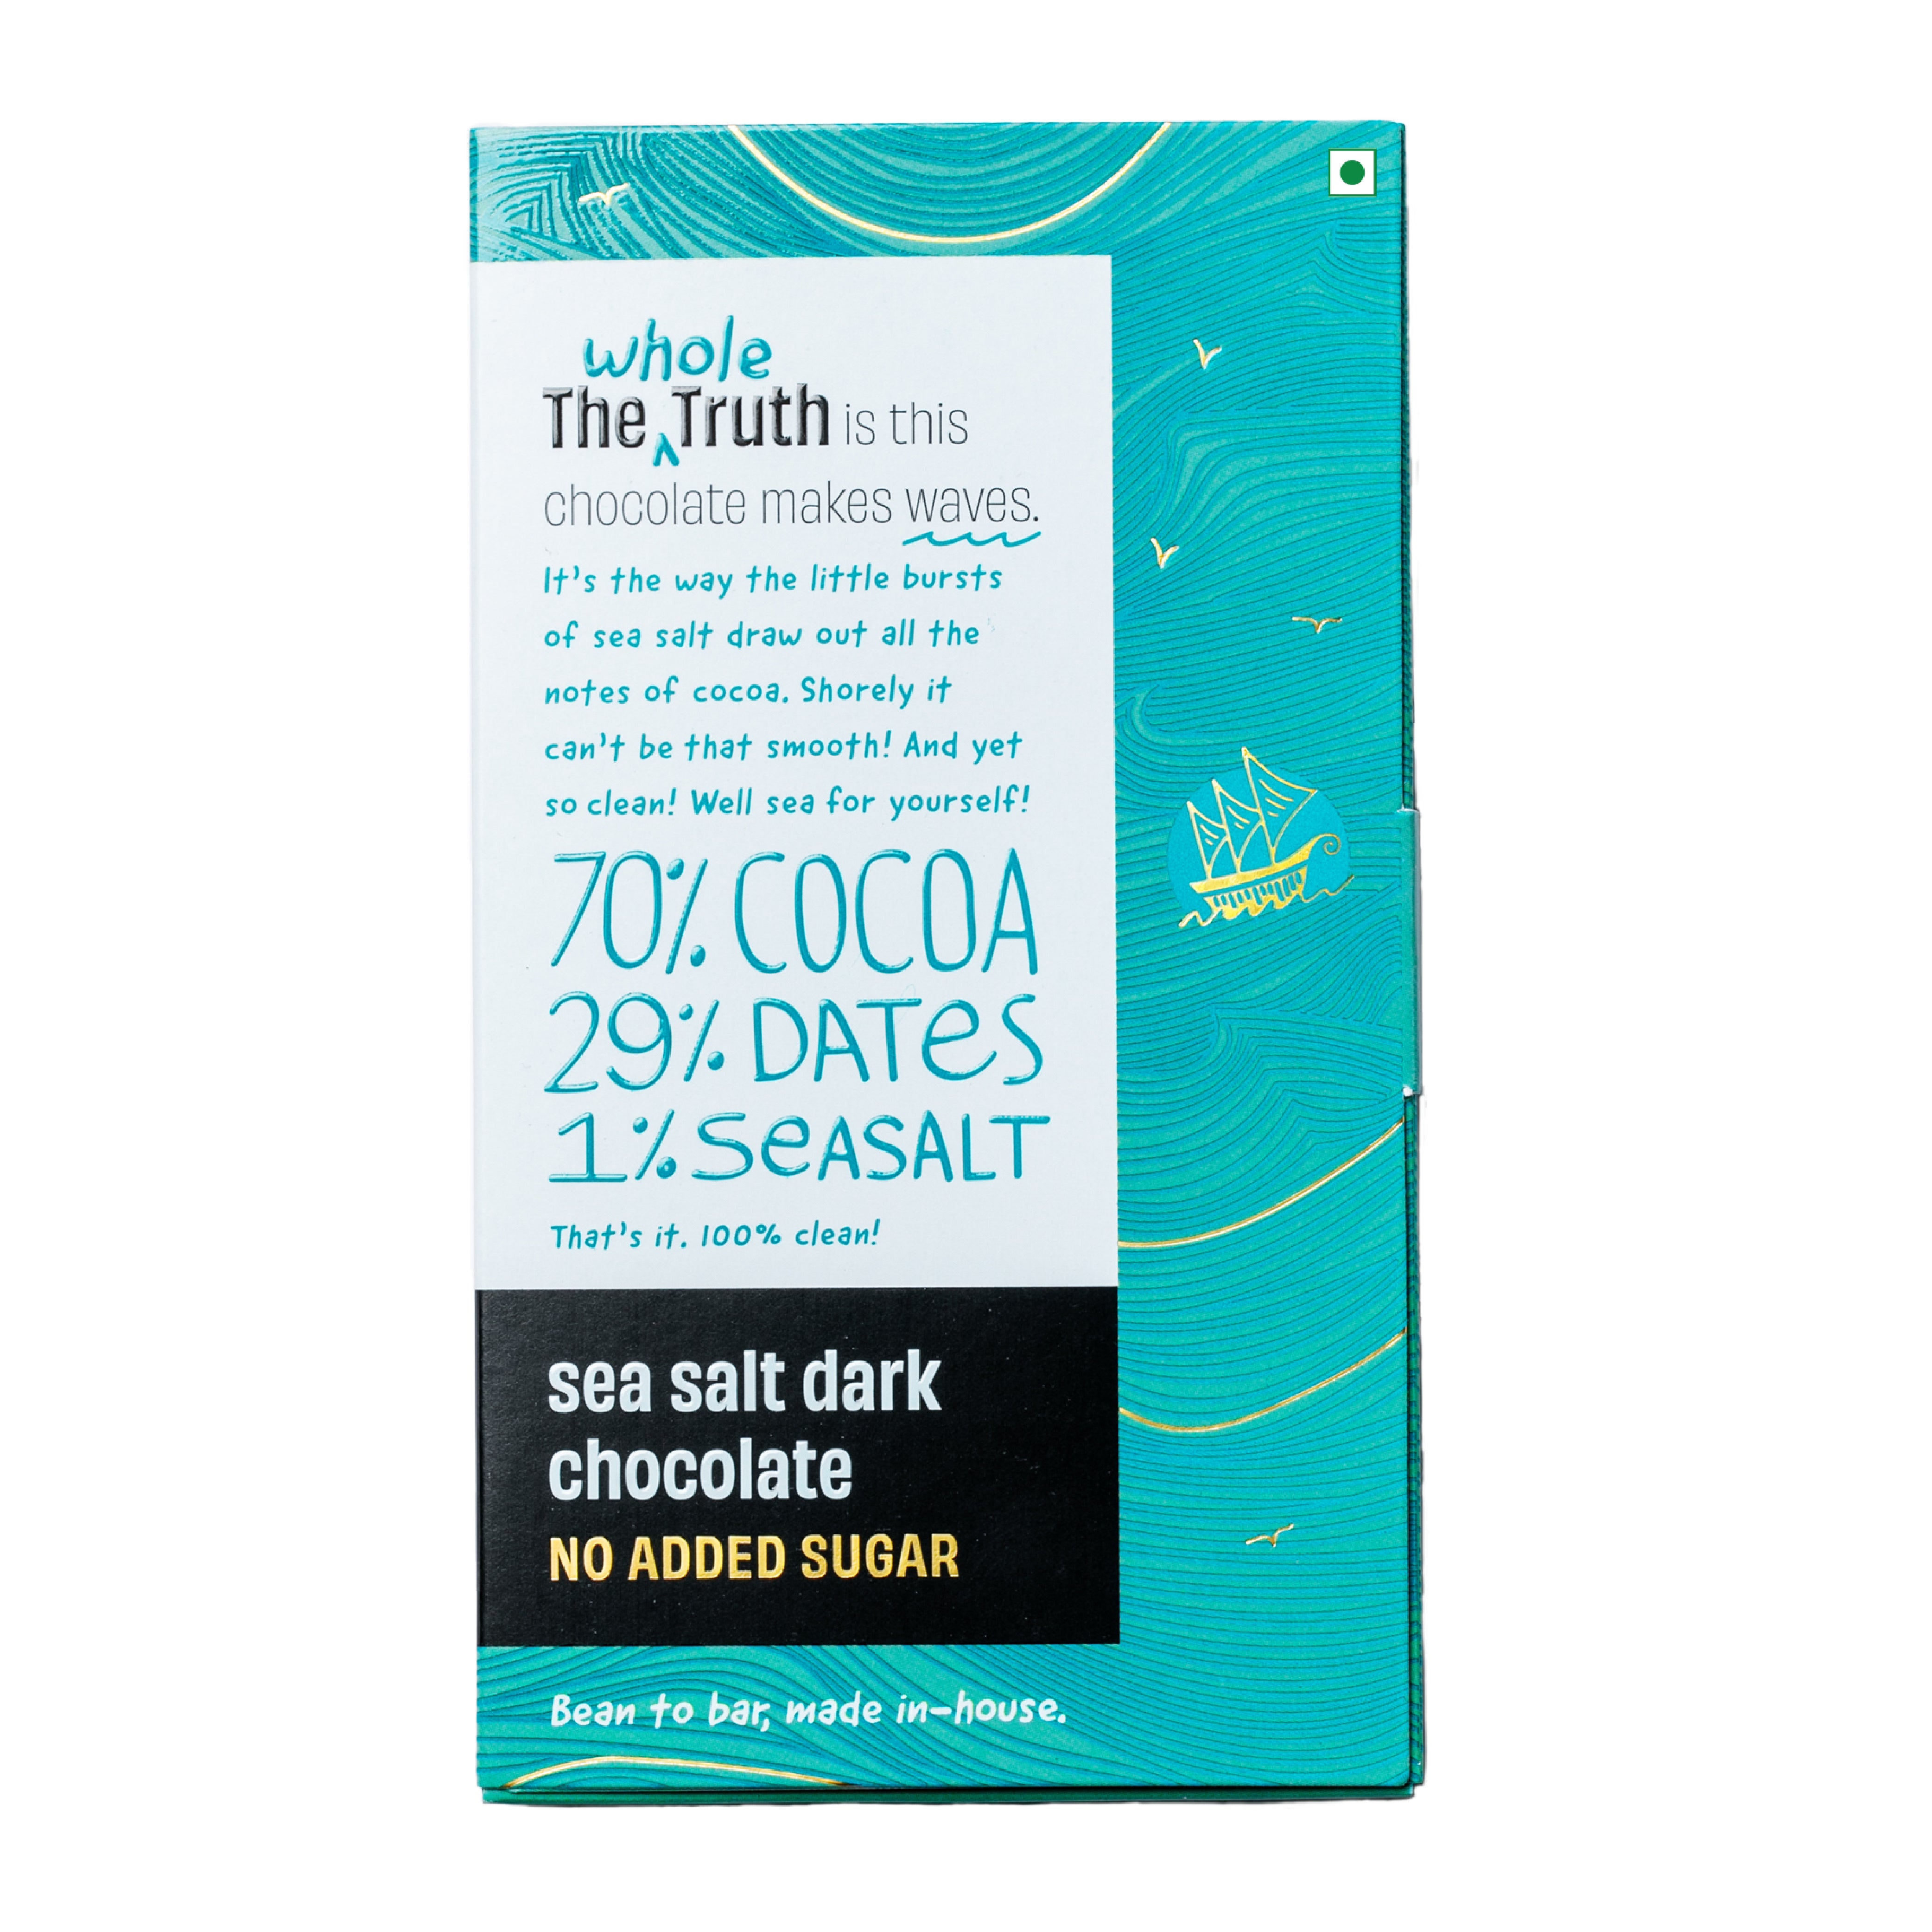 The Whole Truth Dark Chocolate - Sea Salt | Pack of 3 x80g | No Added Sugar | Sweetened Only with Dates | 79% Cocoa, 29% Dates, 1% Sea Salt | No Artificial Flavours | Portion Controlled | 100% Vegetarian